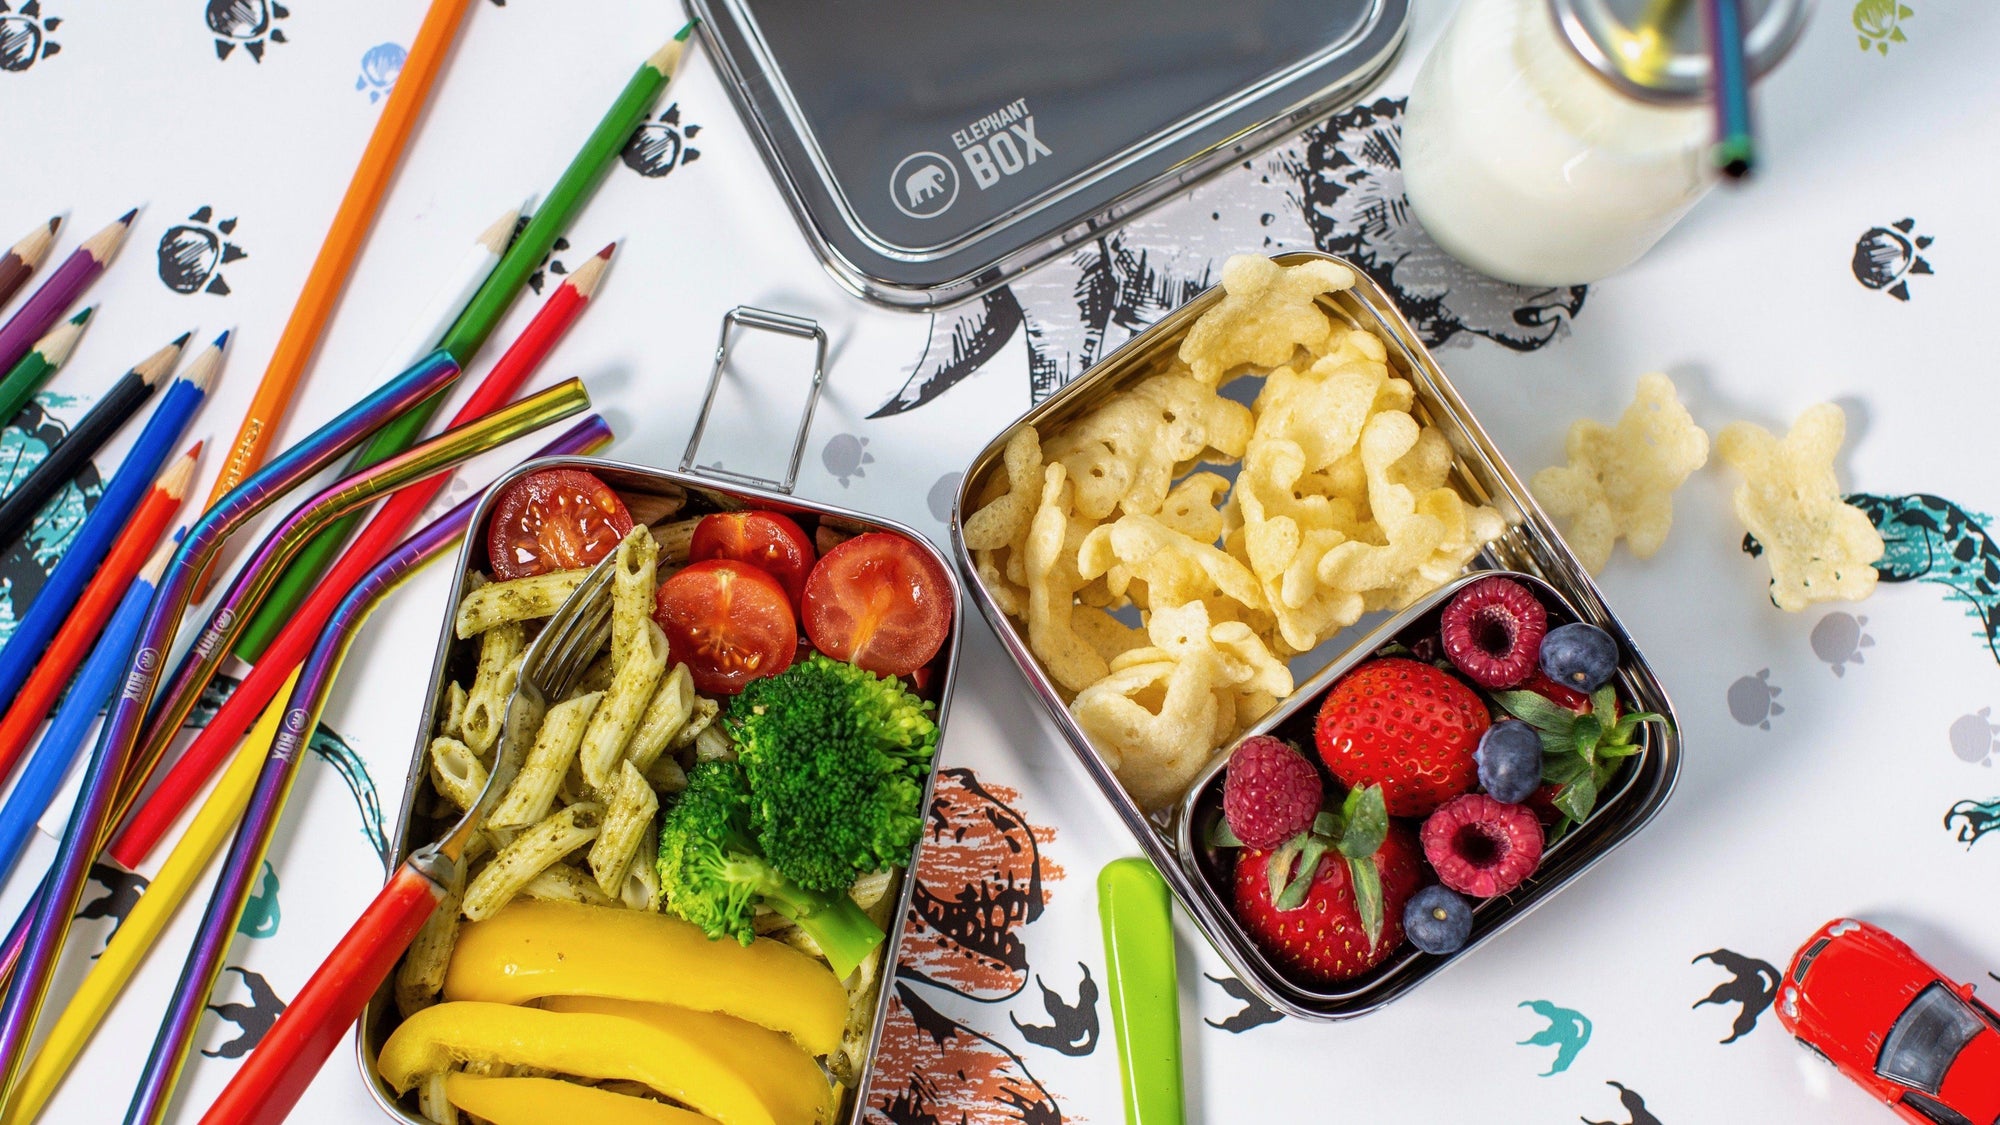 BACK-TO-SCHOOL PACKED LUNCHES EASY (& ECO)!